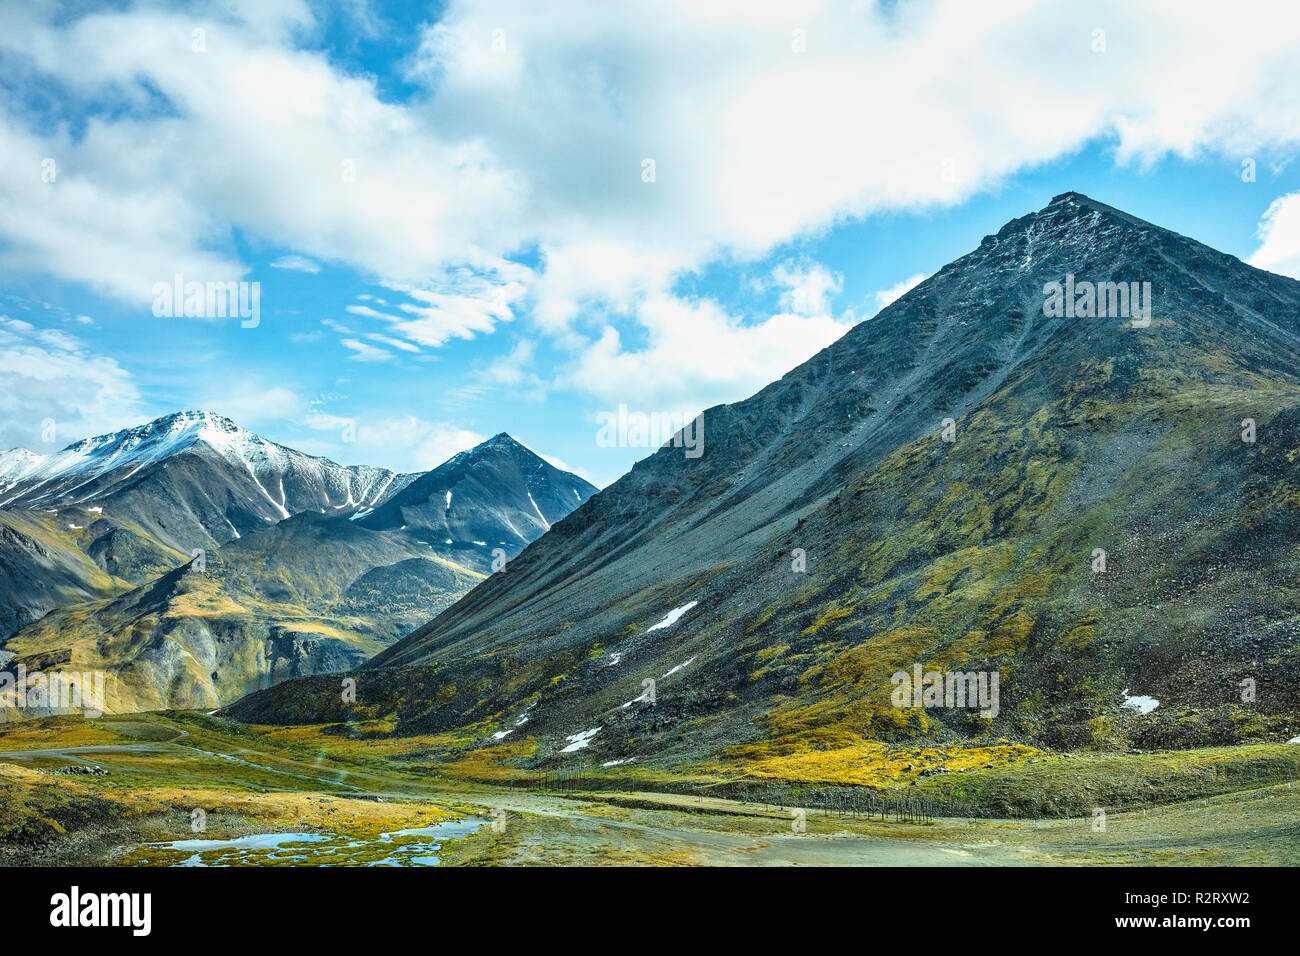 A view of the Atigun Pass in the Brooks Range from Dalton Highway in Alaska, USA Stock Photo